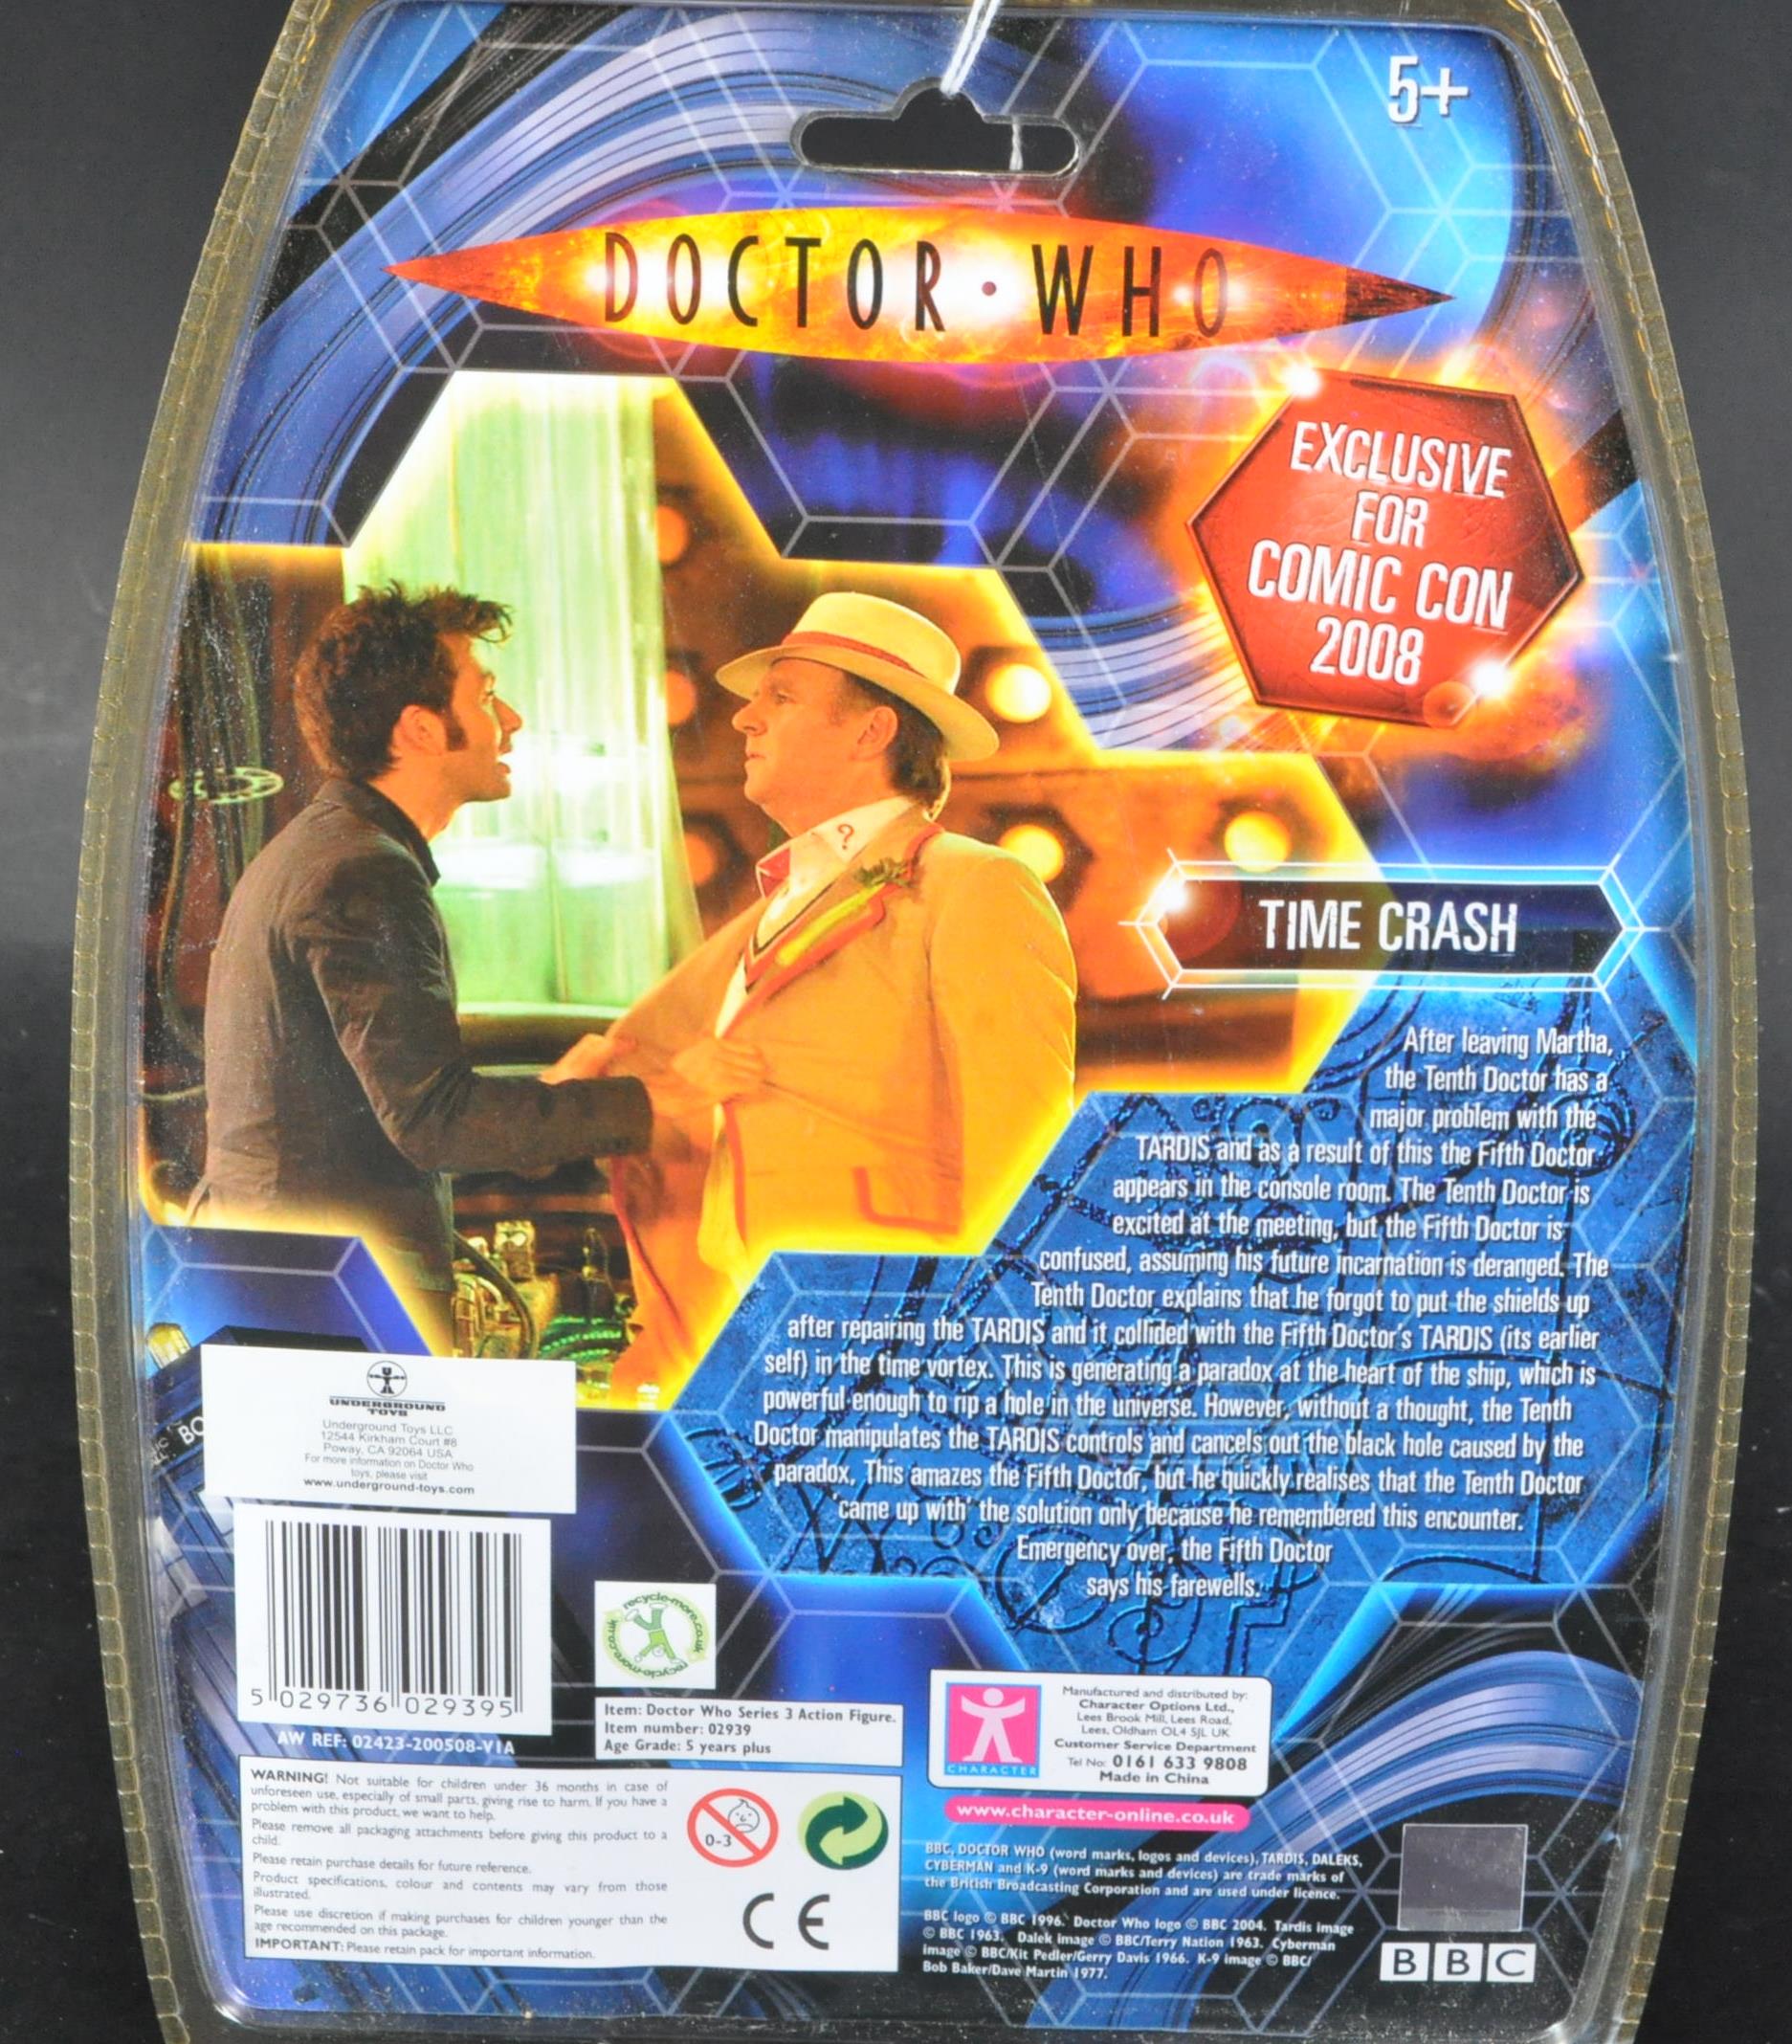 DOCTOR WHO - CHARACTER OPTIONS - SDCC EXCLUSIVE ' TIME CRASH ' FIGURE - Image 4 of 4